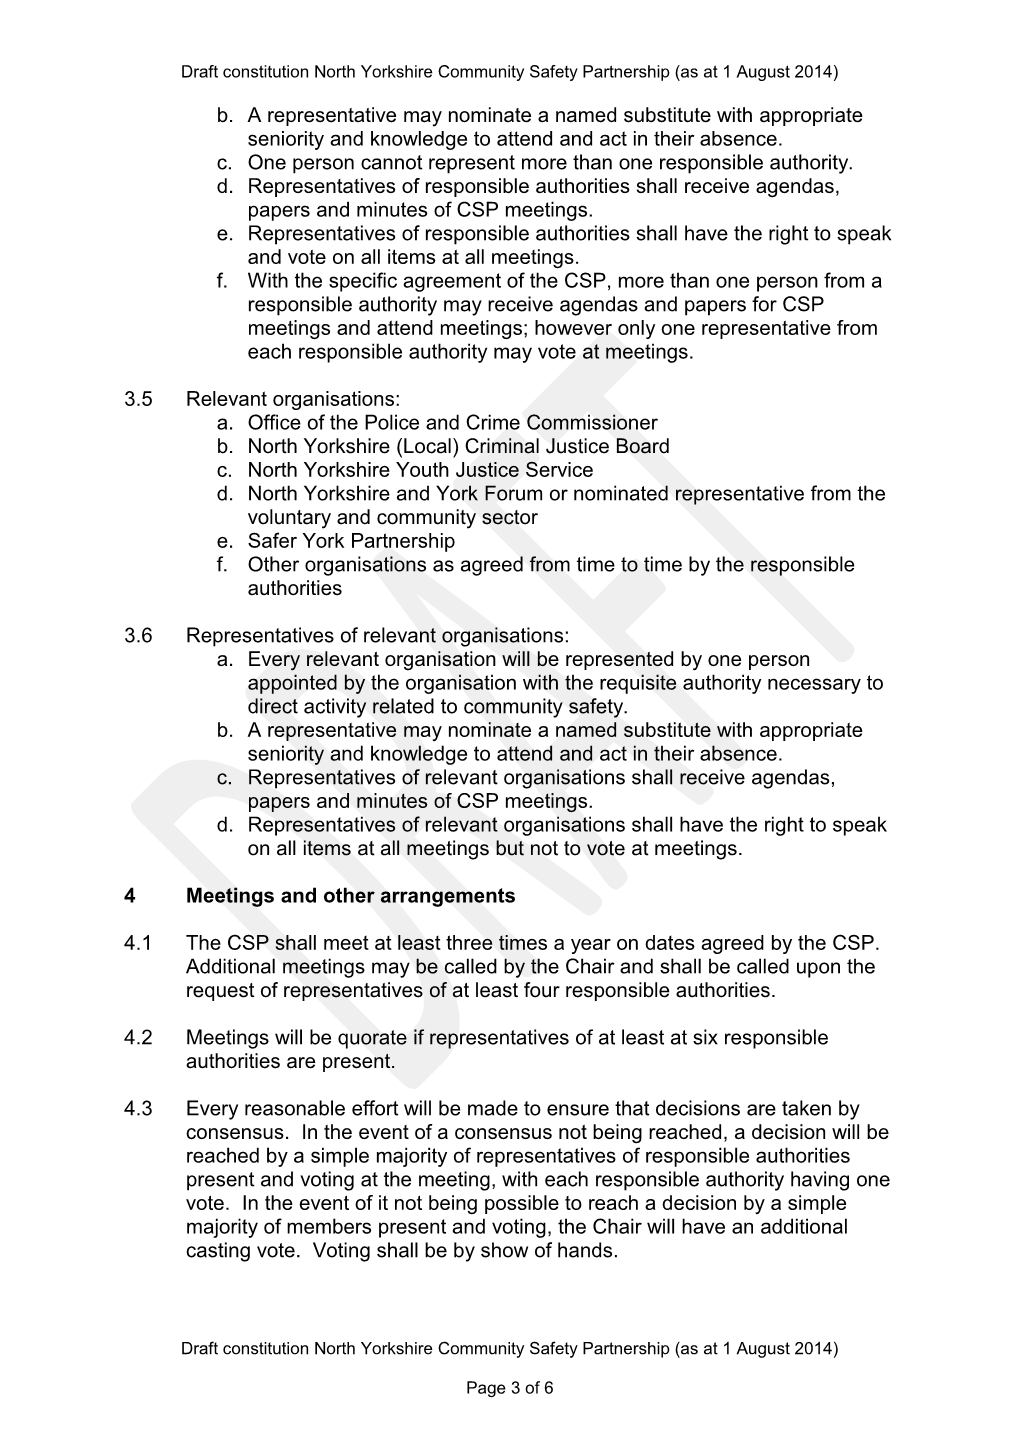 Draft Constitution North Yorkshire Community Safety Partnership (As at 1 August 2014)